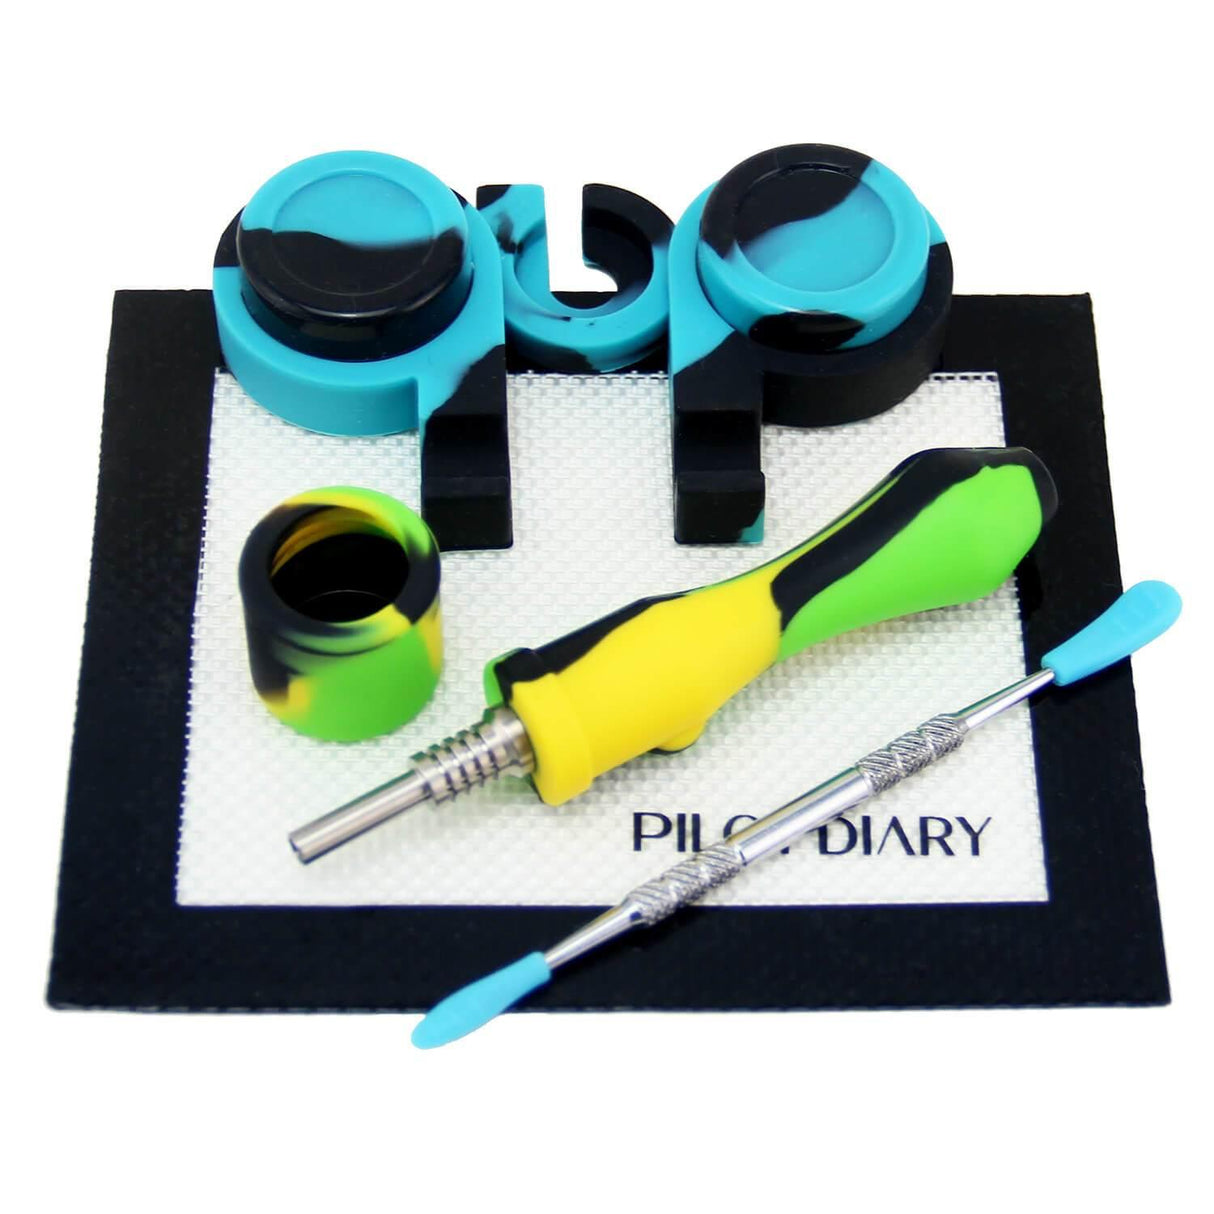 PILOT DIARY Mini Honey Straw Dab Kit with Silicone Containers - Top View